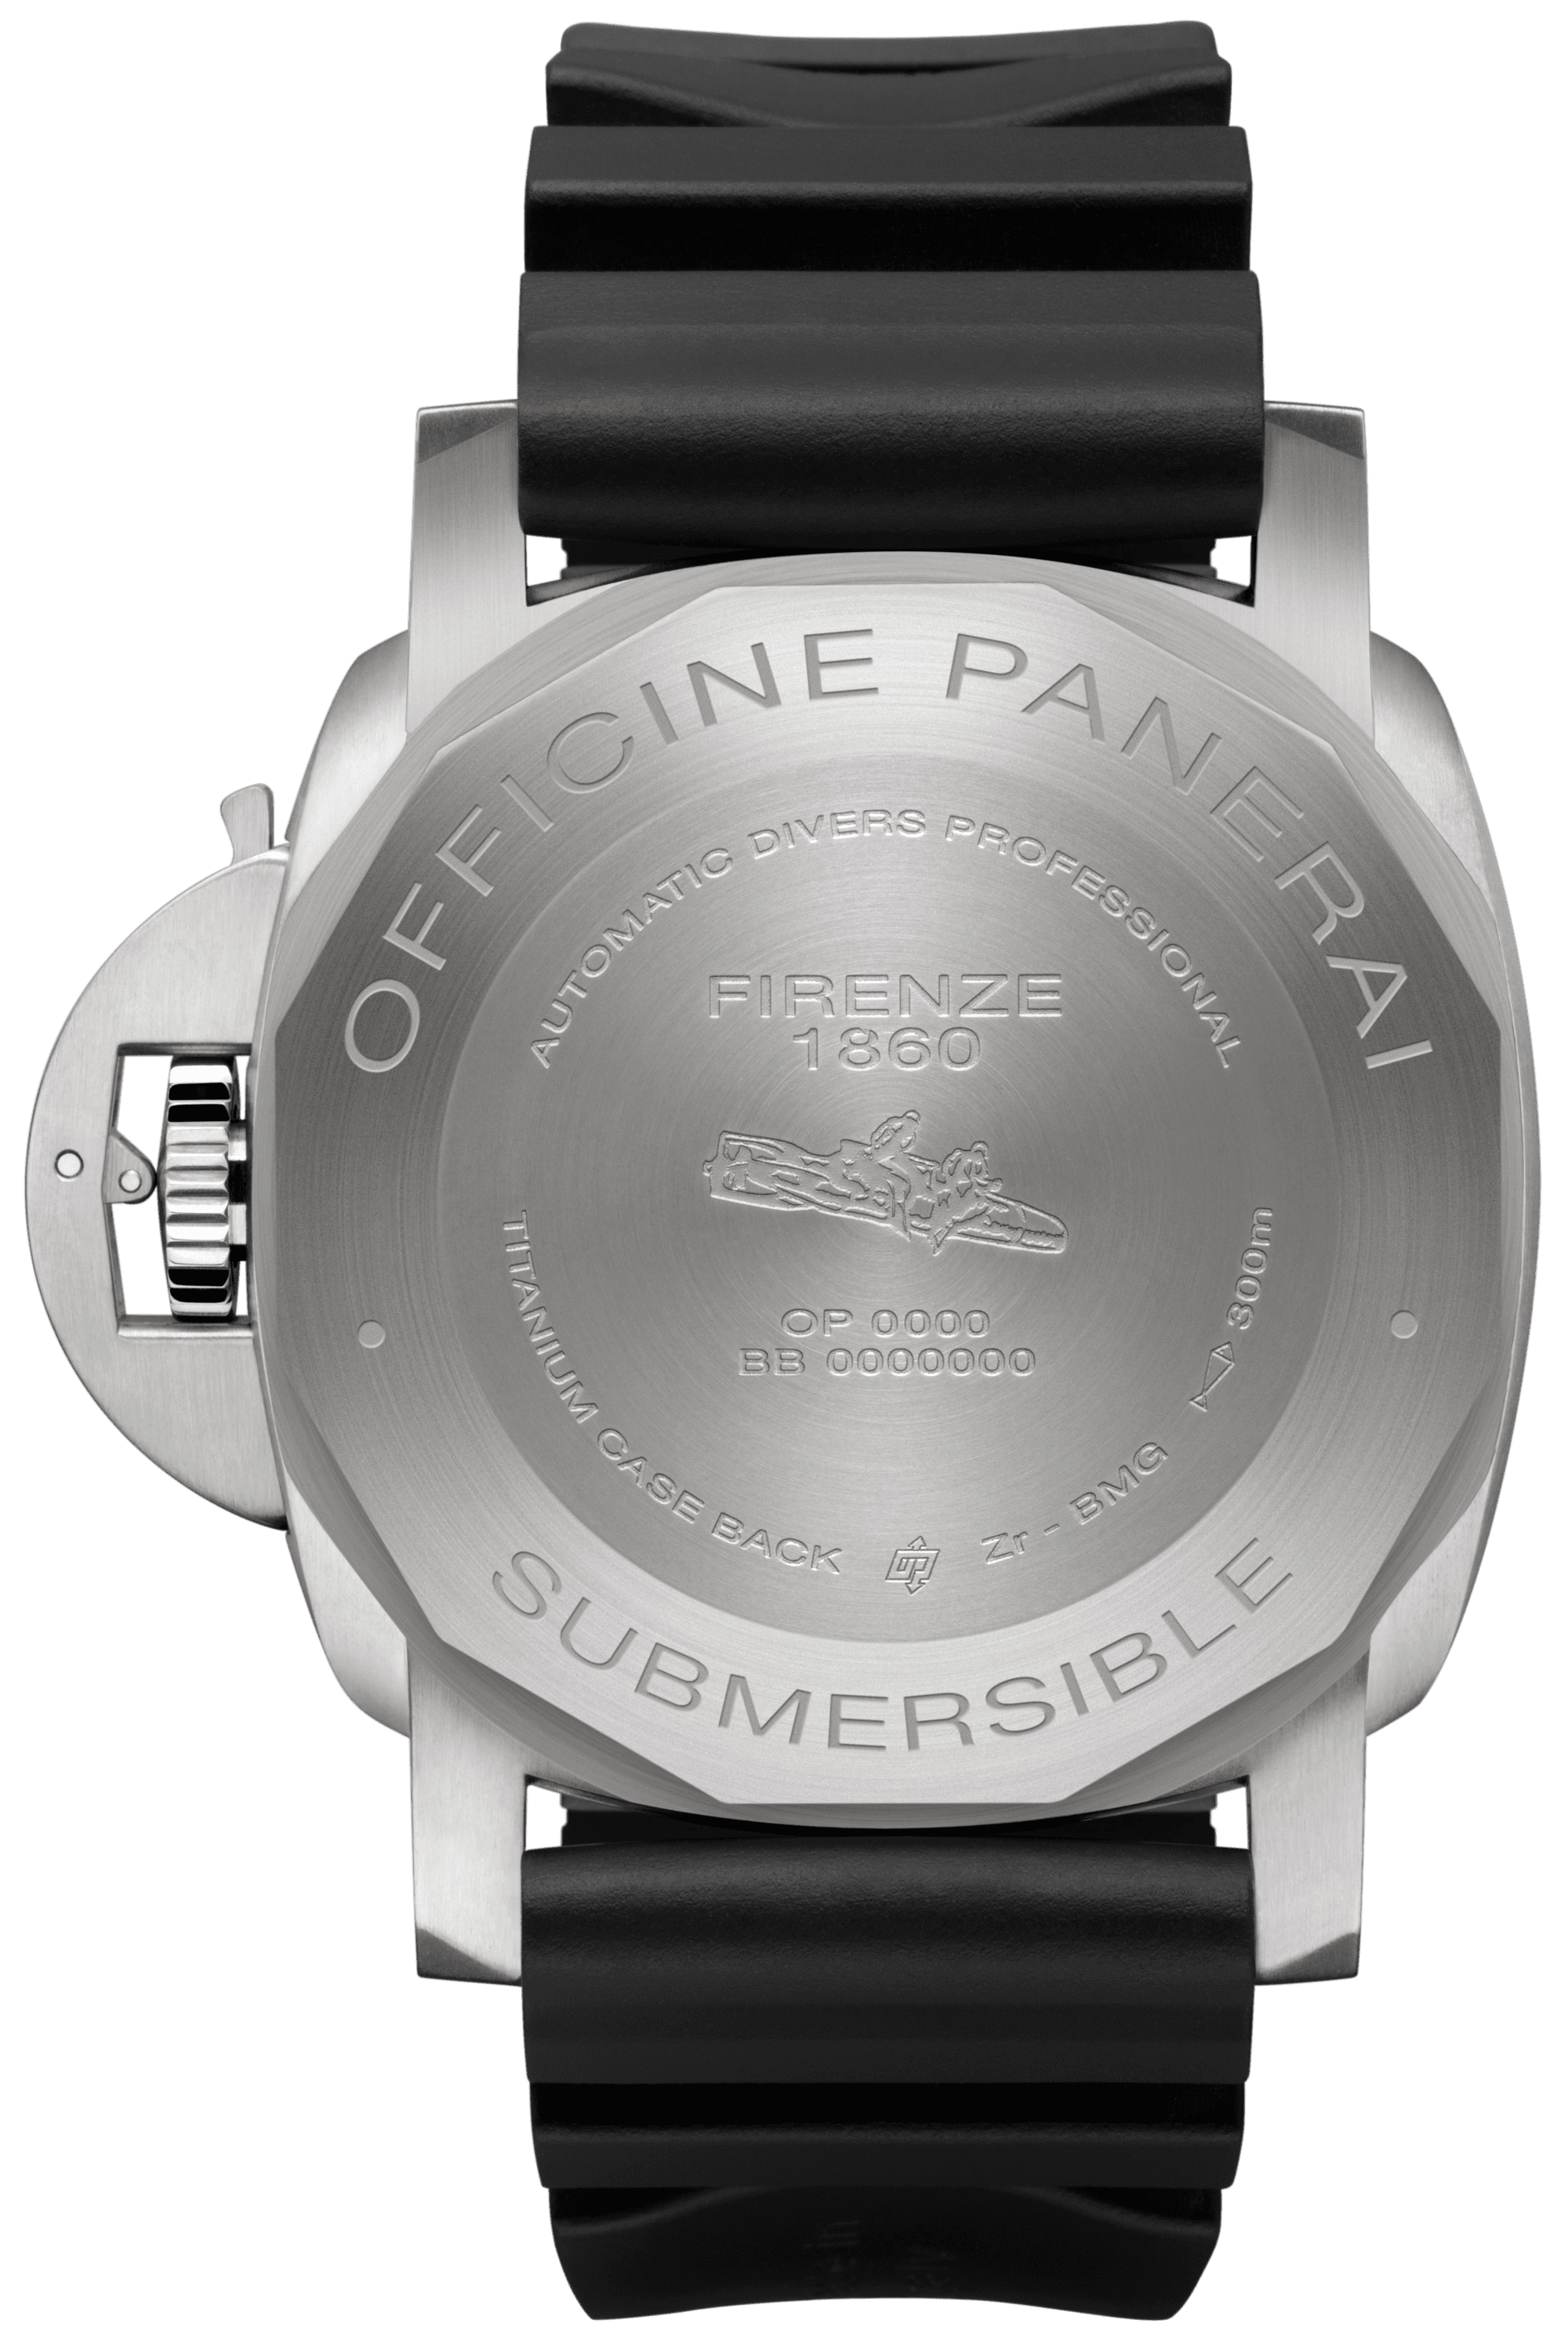 Submersible BMG-TECH™ - 47mm SUBMERSIBLE Référence :  PAM02692 -5